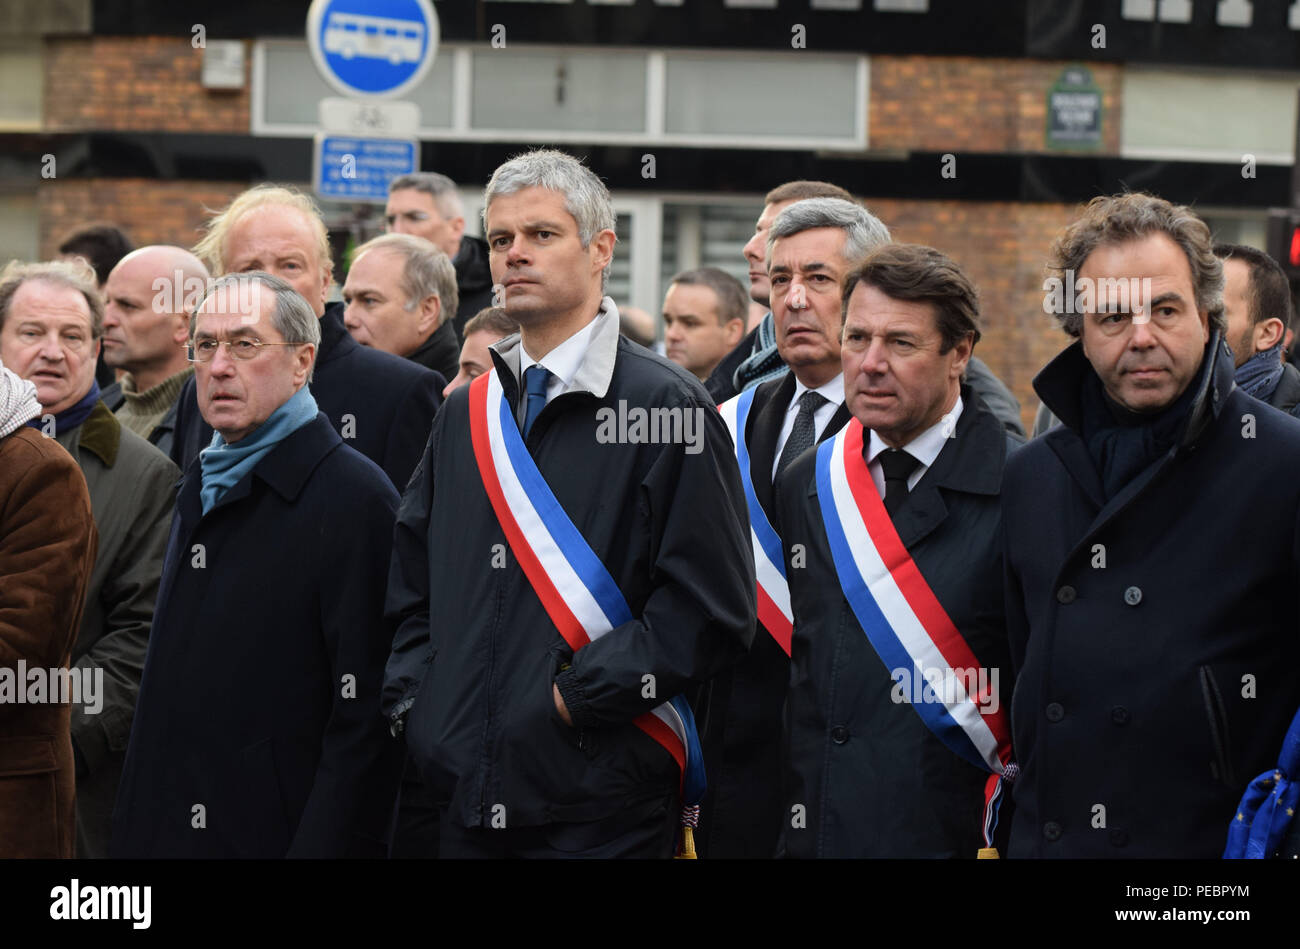 January 11, 2015 - Paris, France:  Opposition politicians Claude Gueant, Laurent Wauquiez, Christian Estrosi, and Luc Chatel take part in a unity march following the deadly Paris attacks. Four million people demonstrated across the country in a 'Marche Republicaine' (Republican March) celebrating the nation's unity in face of terrorist threats. Thousands of people had banners or cartoons referring to Charlie Hebdo, the satirical magazine whose office was targeted by Islamist gunmen earlier in the week. La grande marche republicaine en hommage aux victimes de l'attentat contre Charlie Hebdo a r Stock Photo